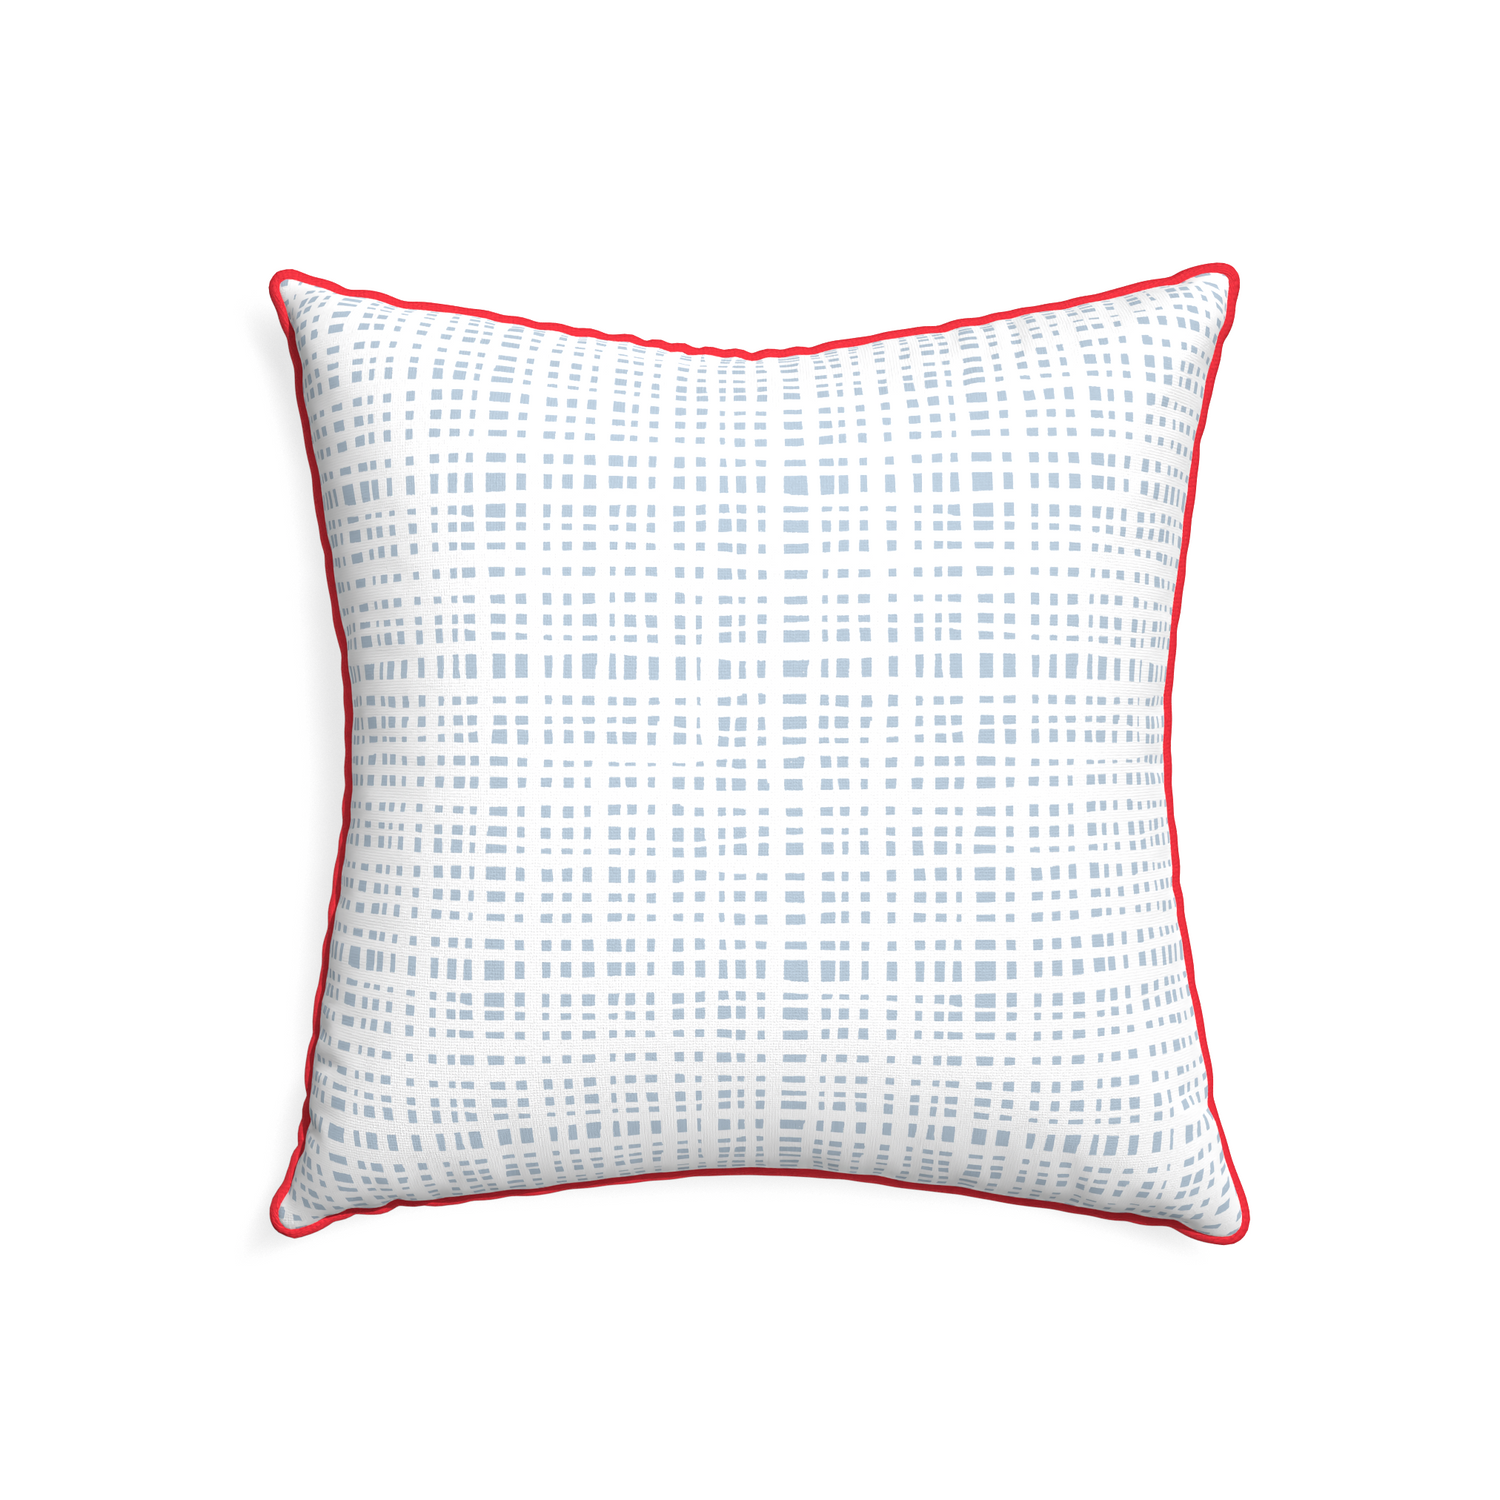 22-square ginger sky custom pillow with cherry piping on white background